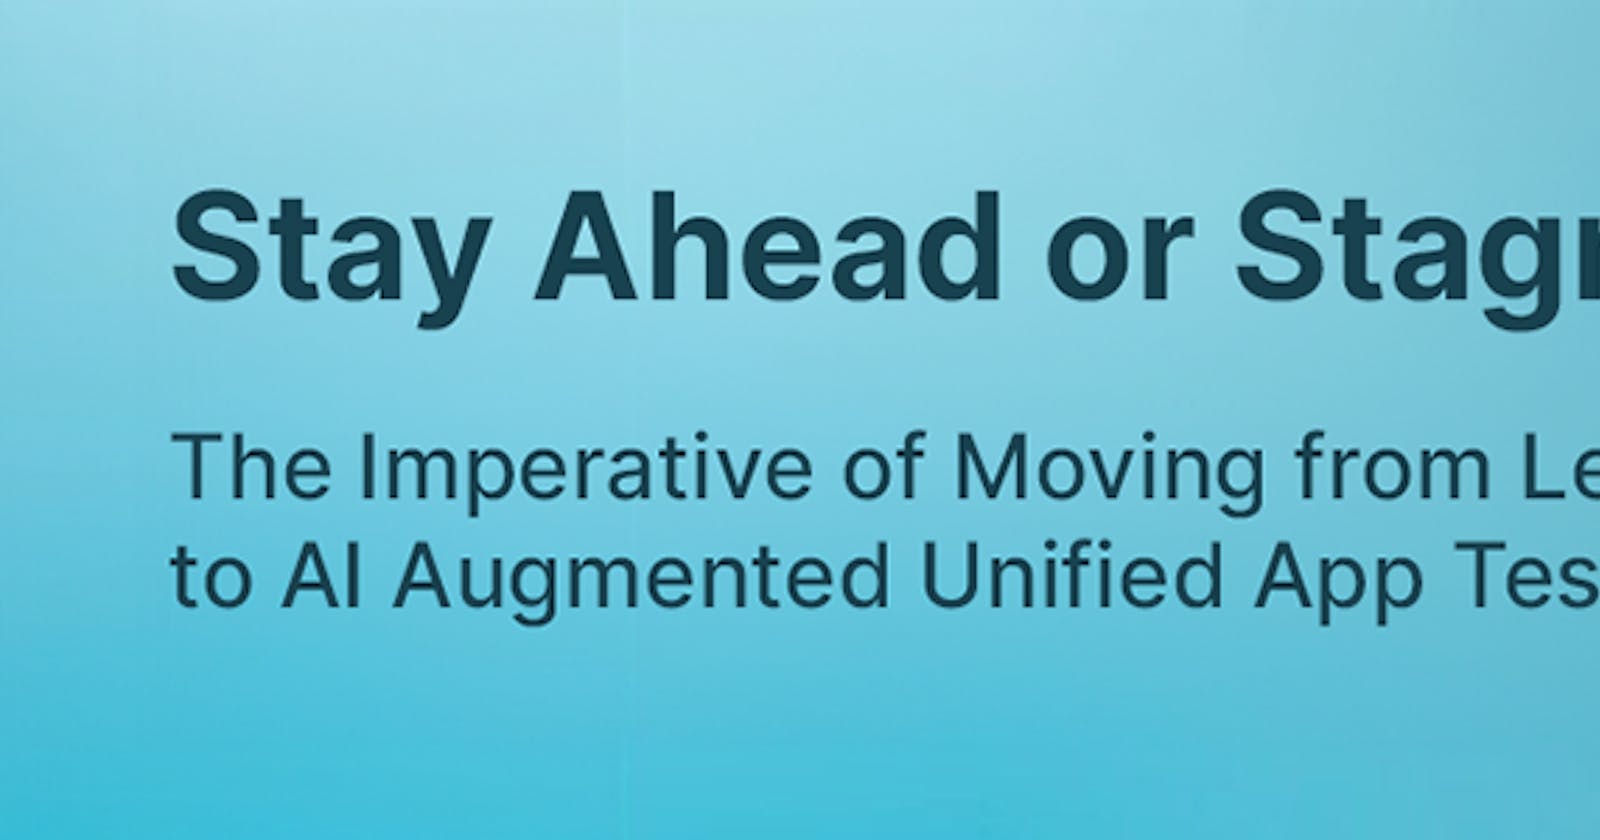 Stay Ahead or Stagnate: The Imperative of Moving from Legacy to AI Augmented Unified App Testing